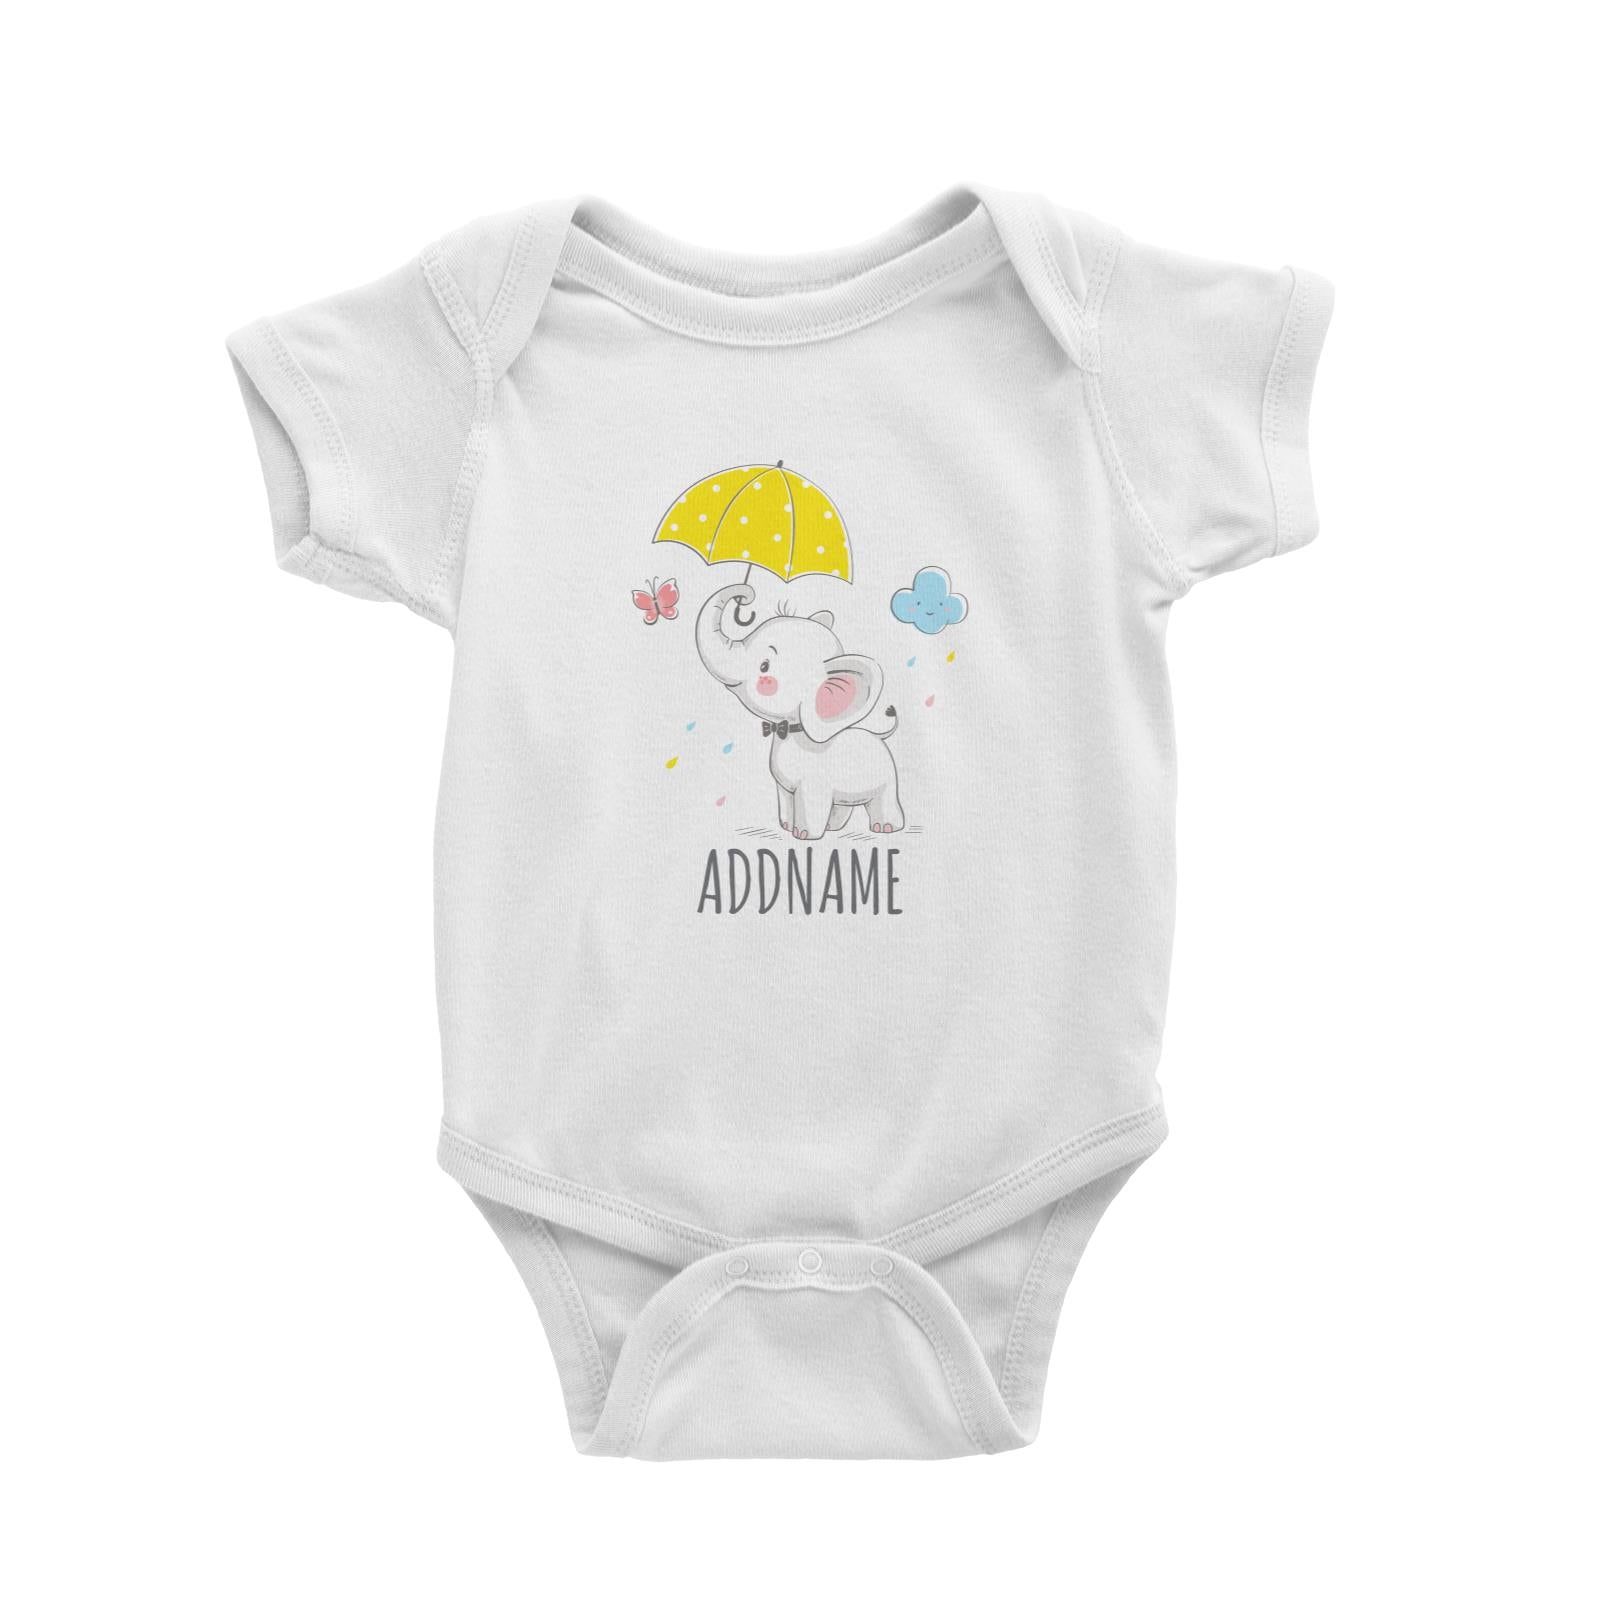 Elephant with Umbrella White Baby Romper Personalizable Designs Cute Sweet Newborn Animal HG